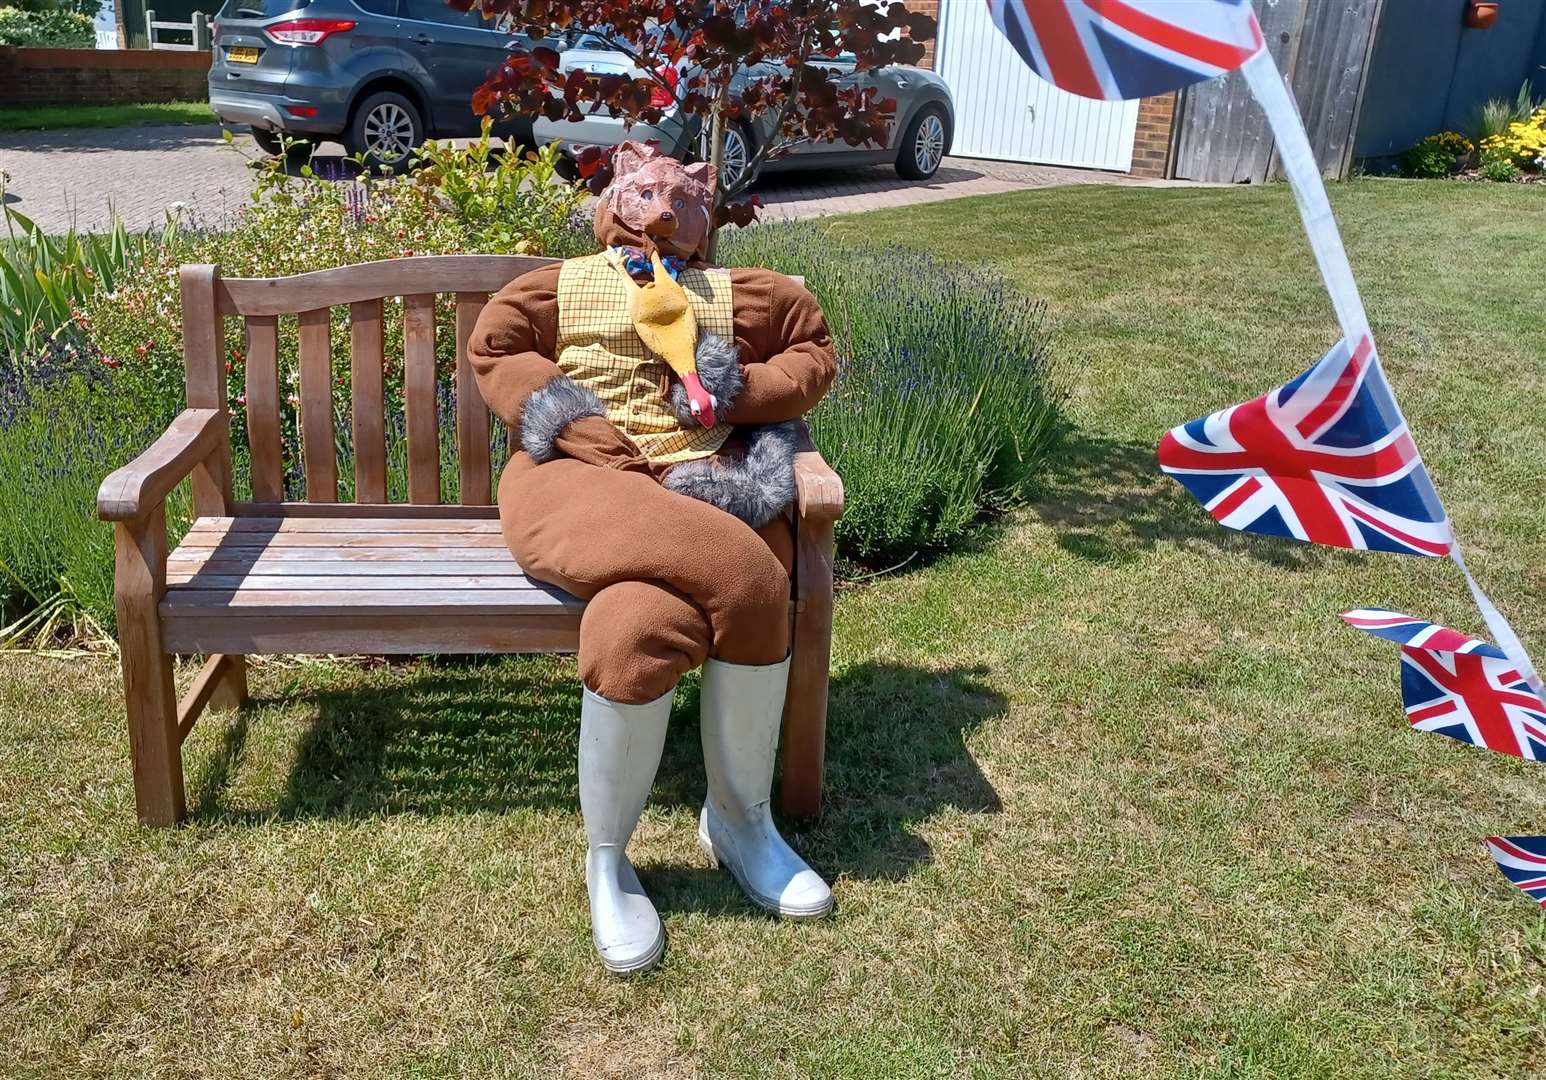 A fox in wellies, eating a chicken and surrounded by bunting is one of the quirkier creations